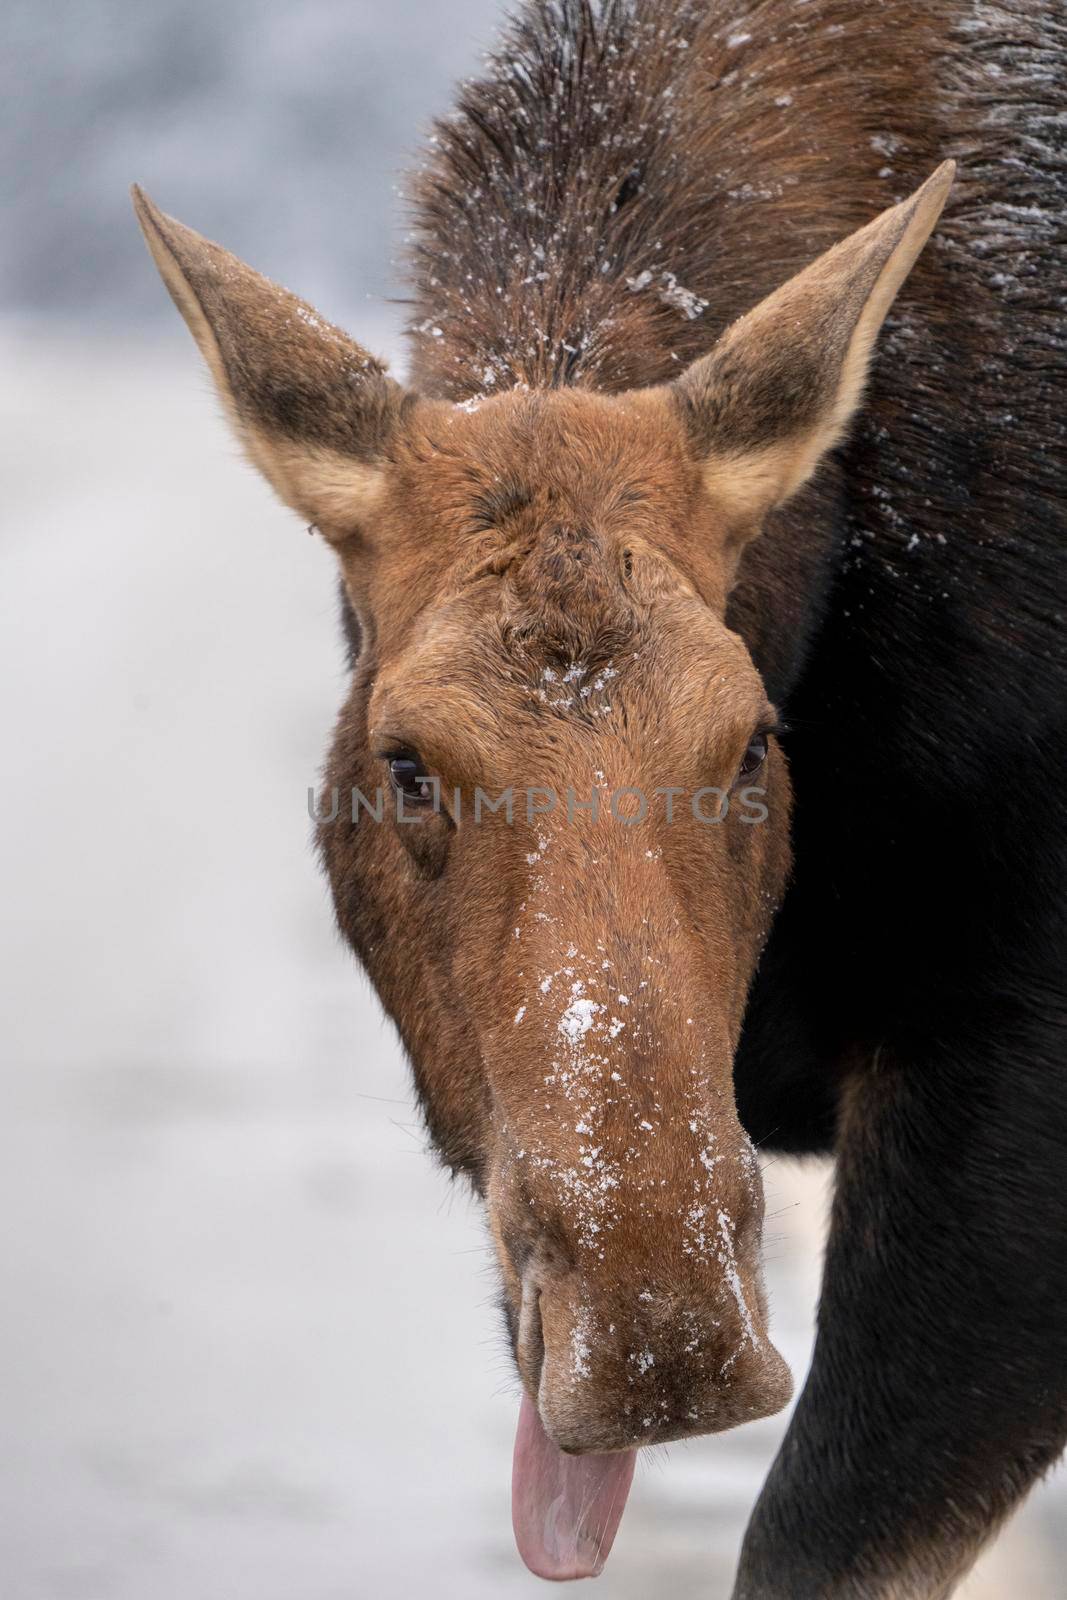 Winter Moose Manitoba by pictureguy